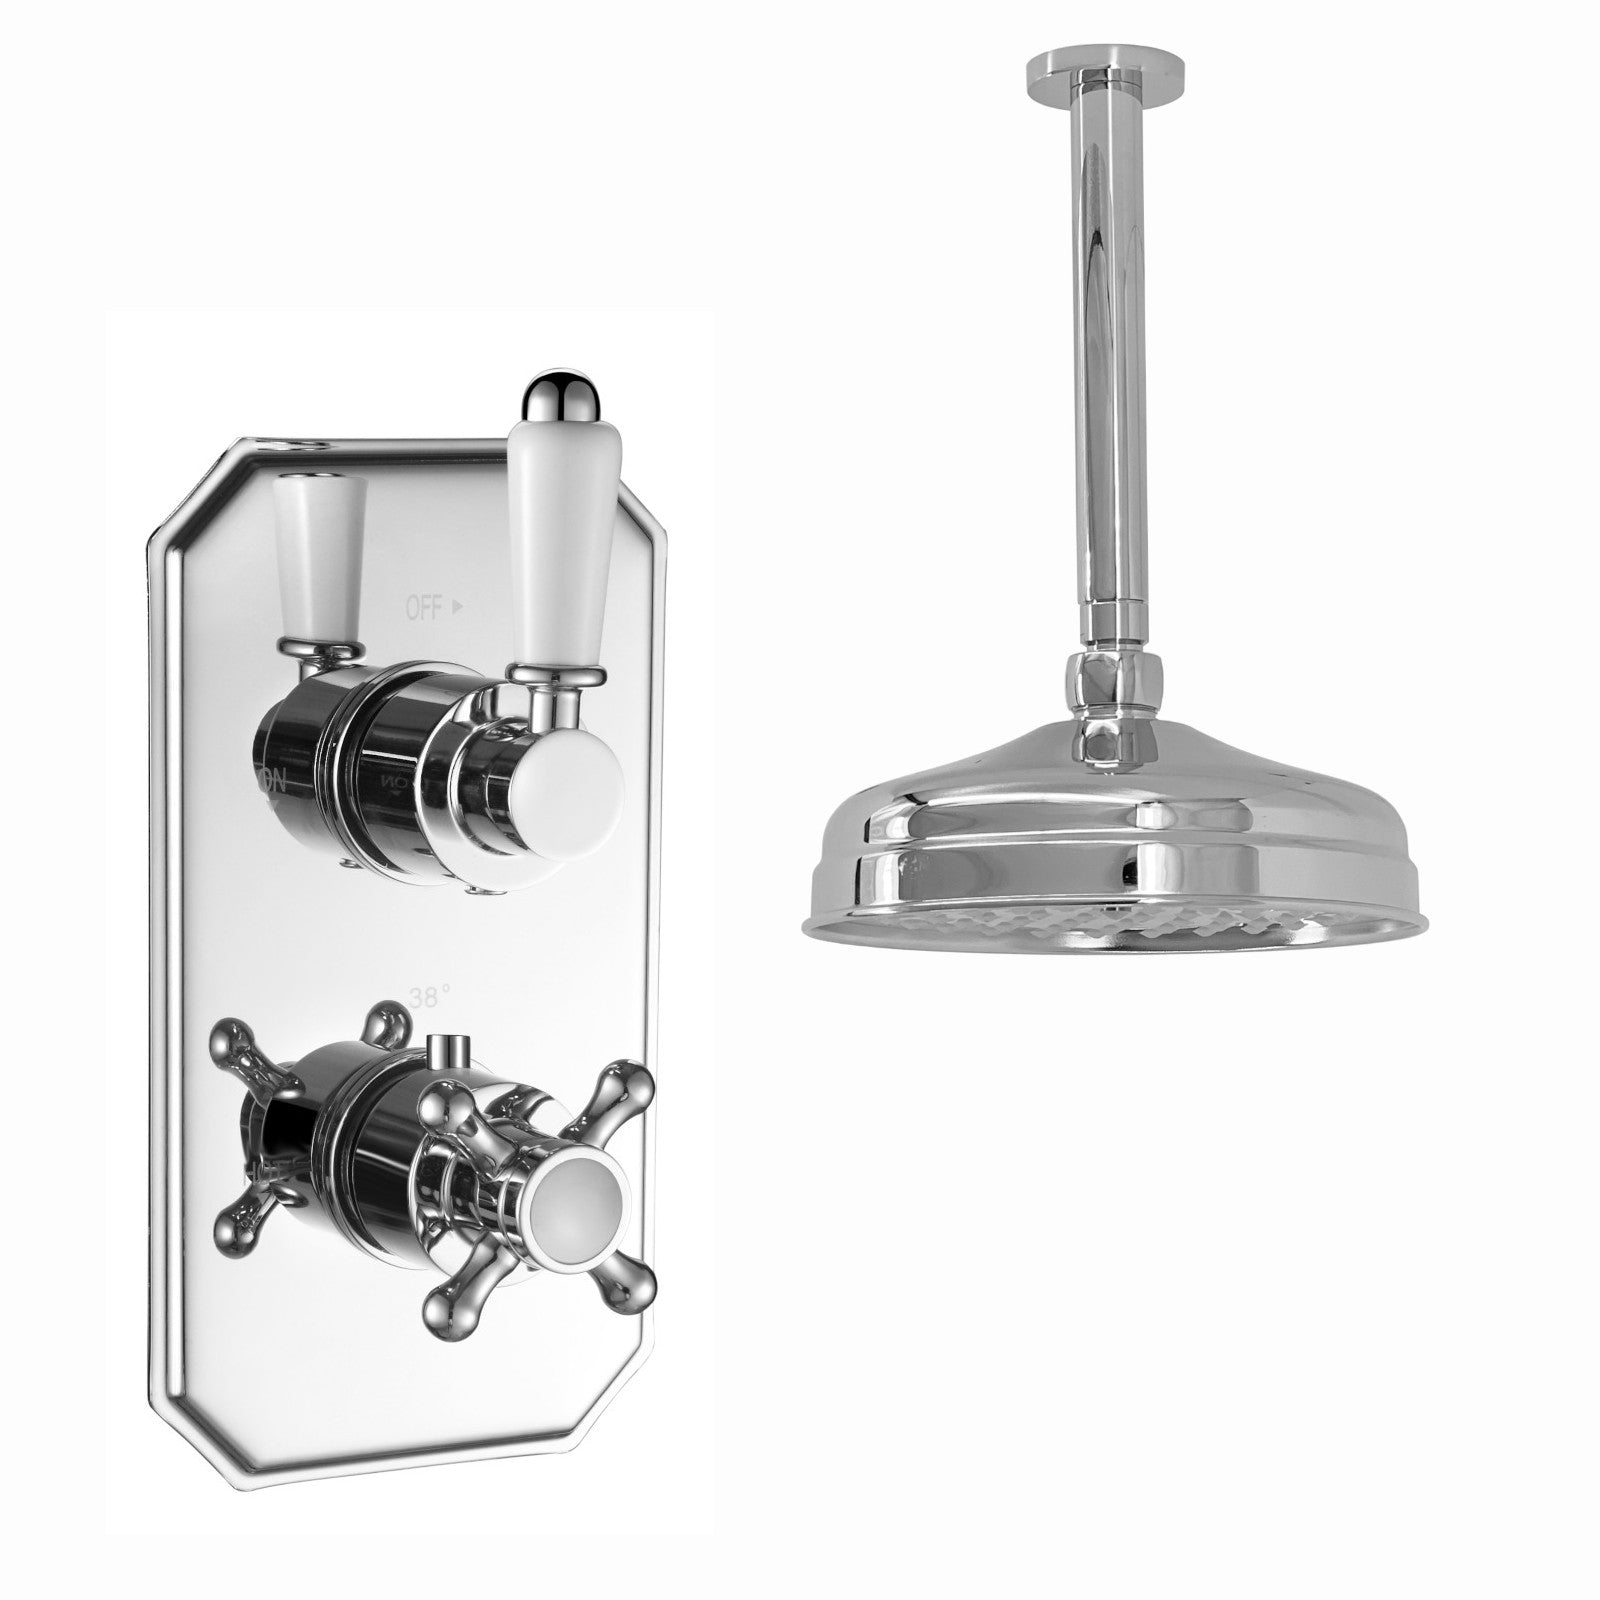 SH0249-01-regent-traditional-crosshead-and-white-lever-concealed-thermostatic-shower-set-ceiling-fixed-8-shower-head-chrome-1-outlet